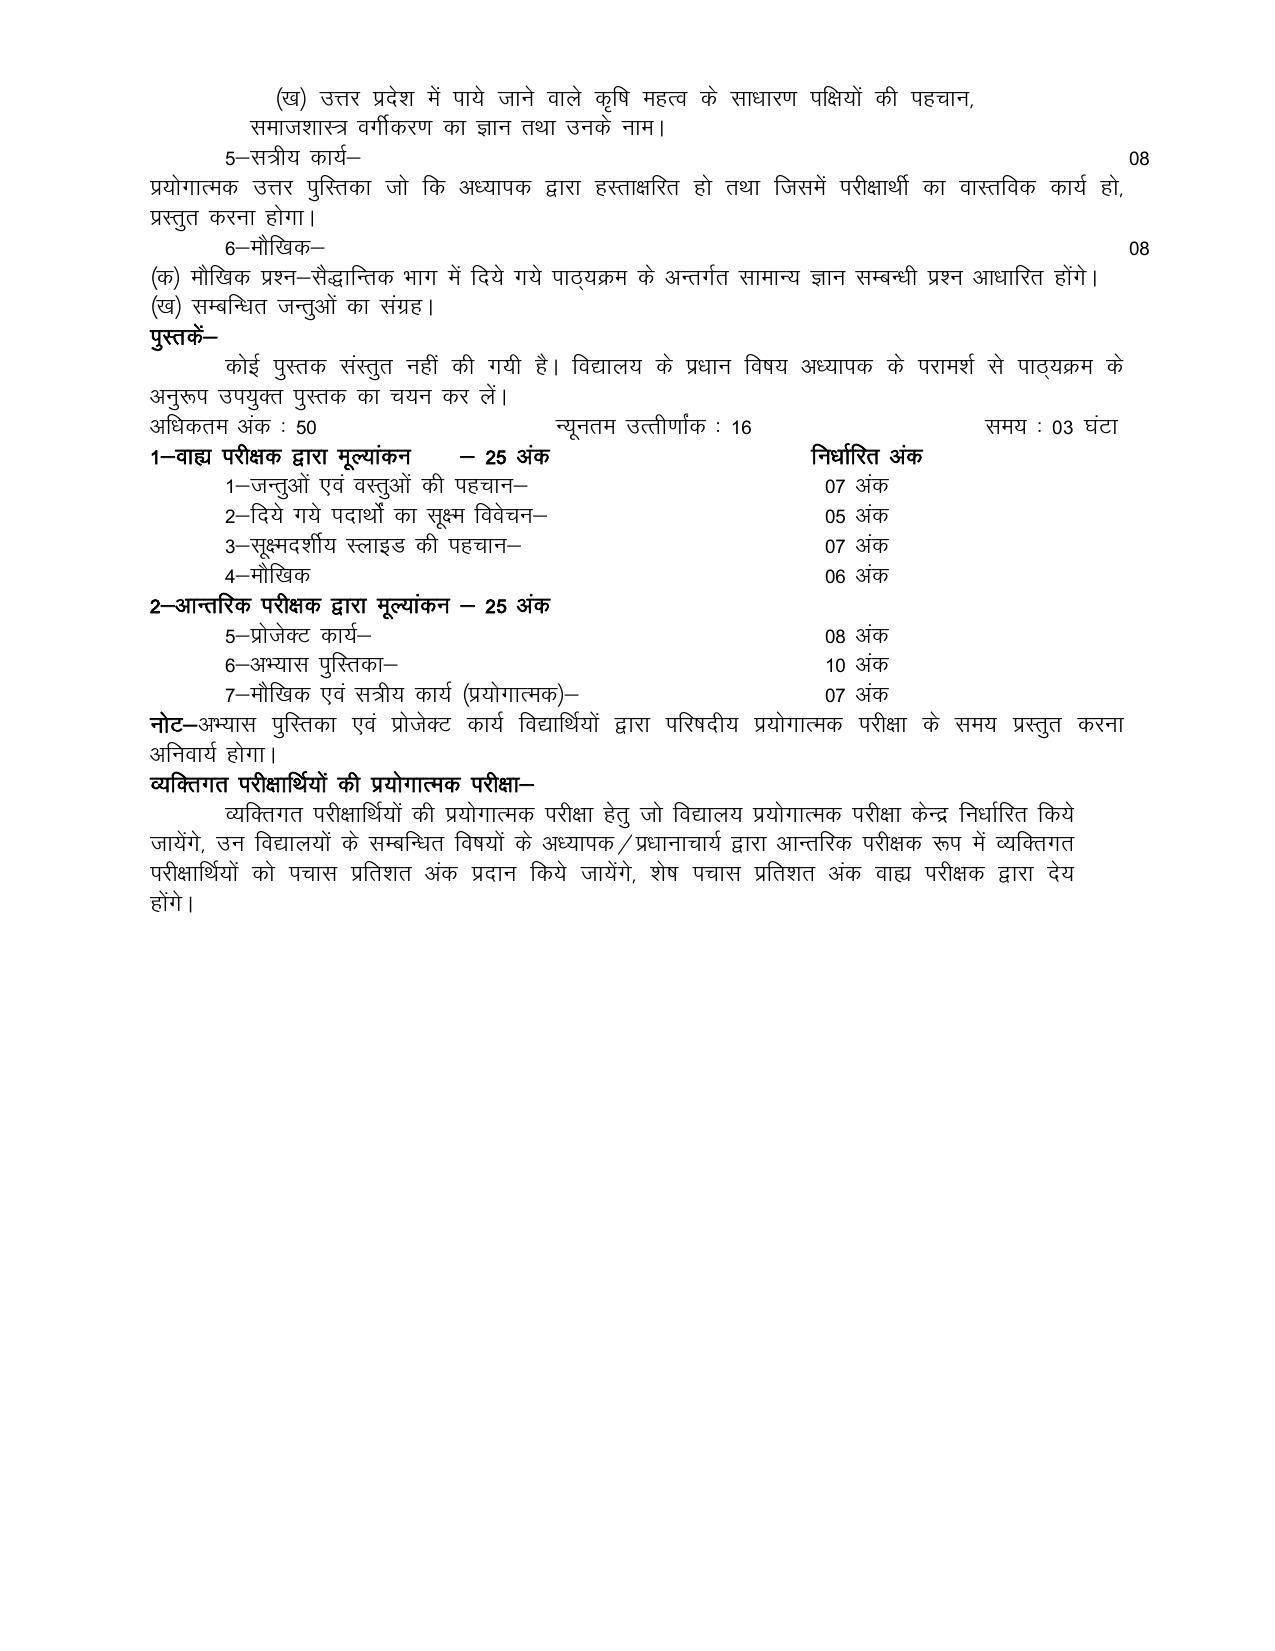 UP Board Class 12 Syllabus Agricultural Zoology - Page 2